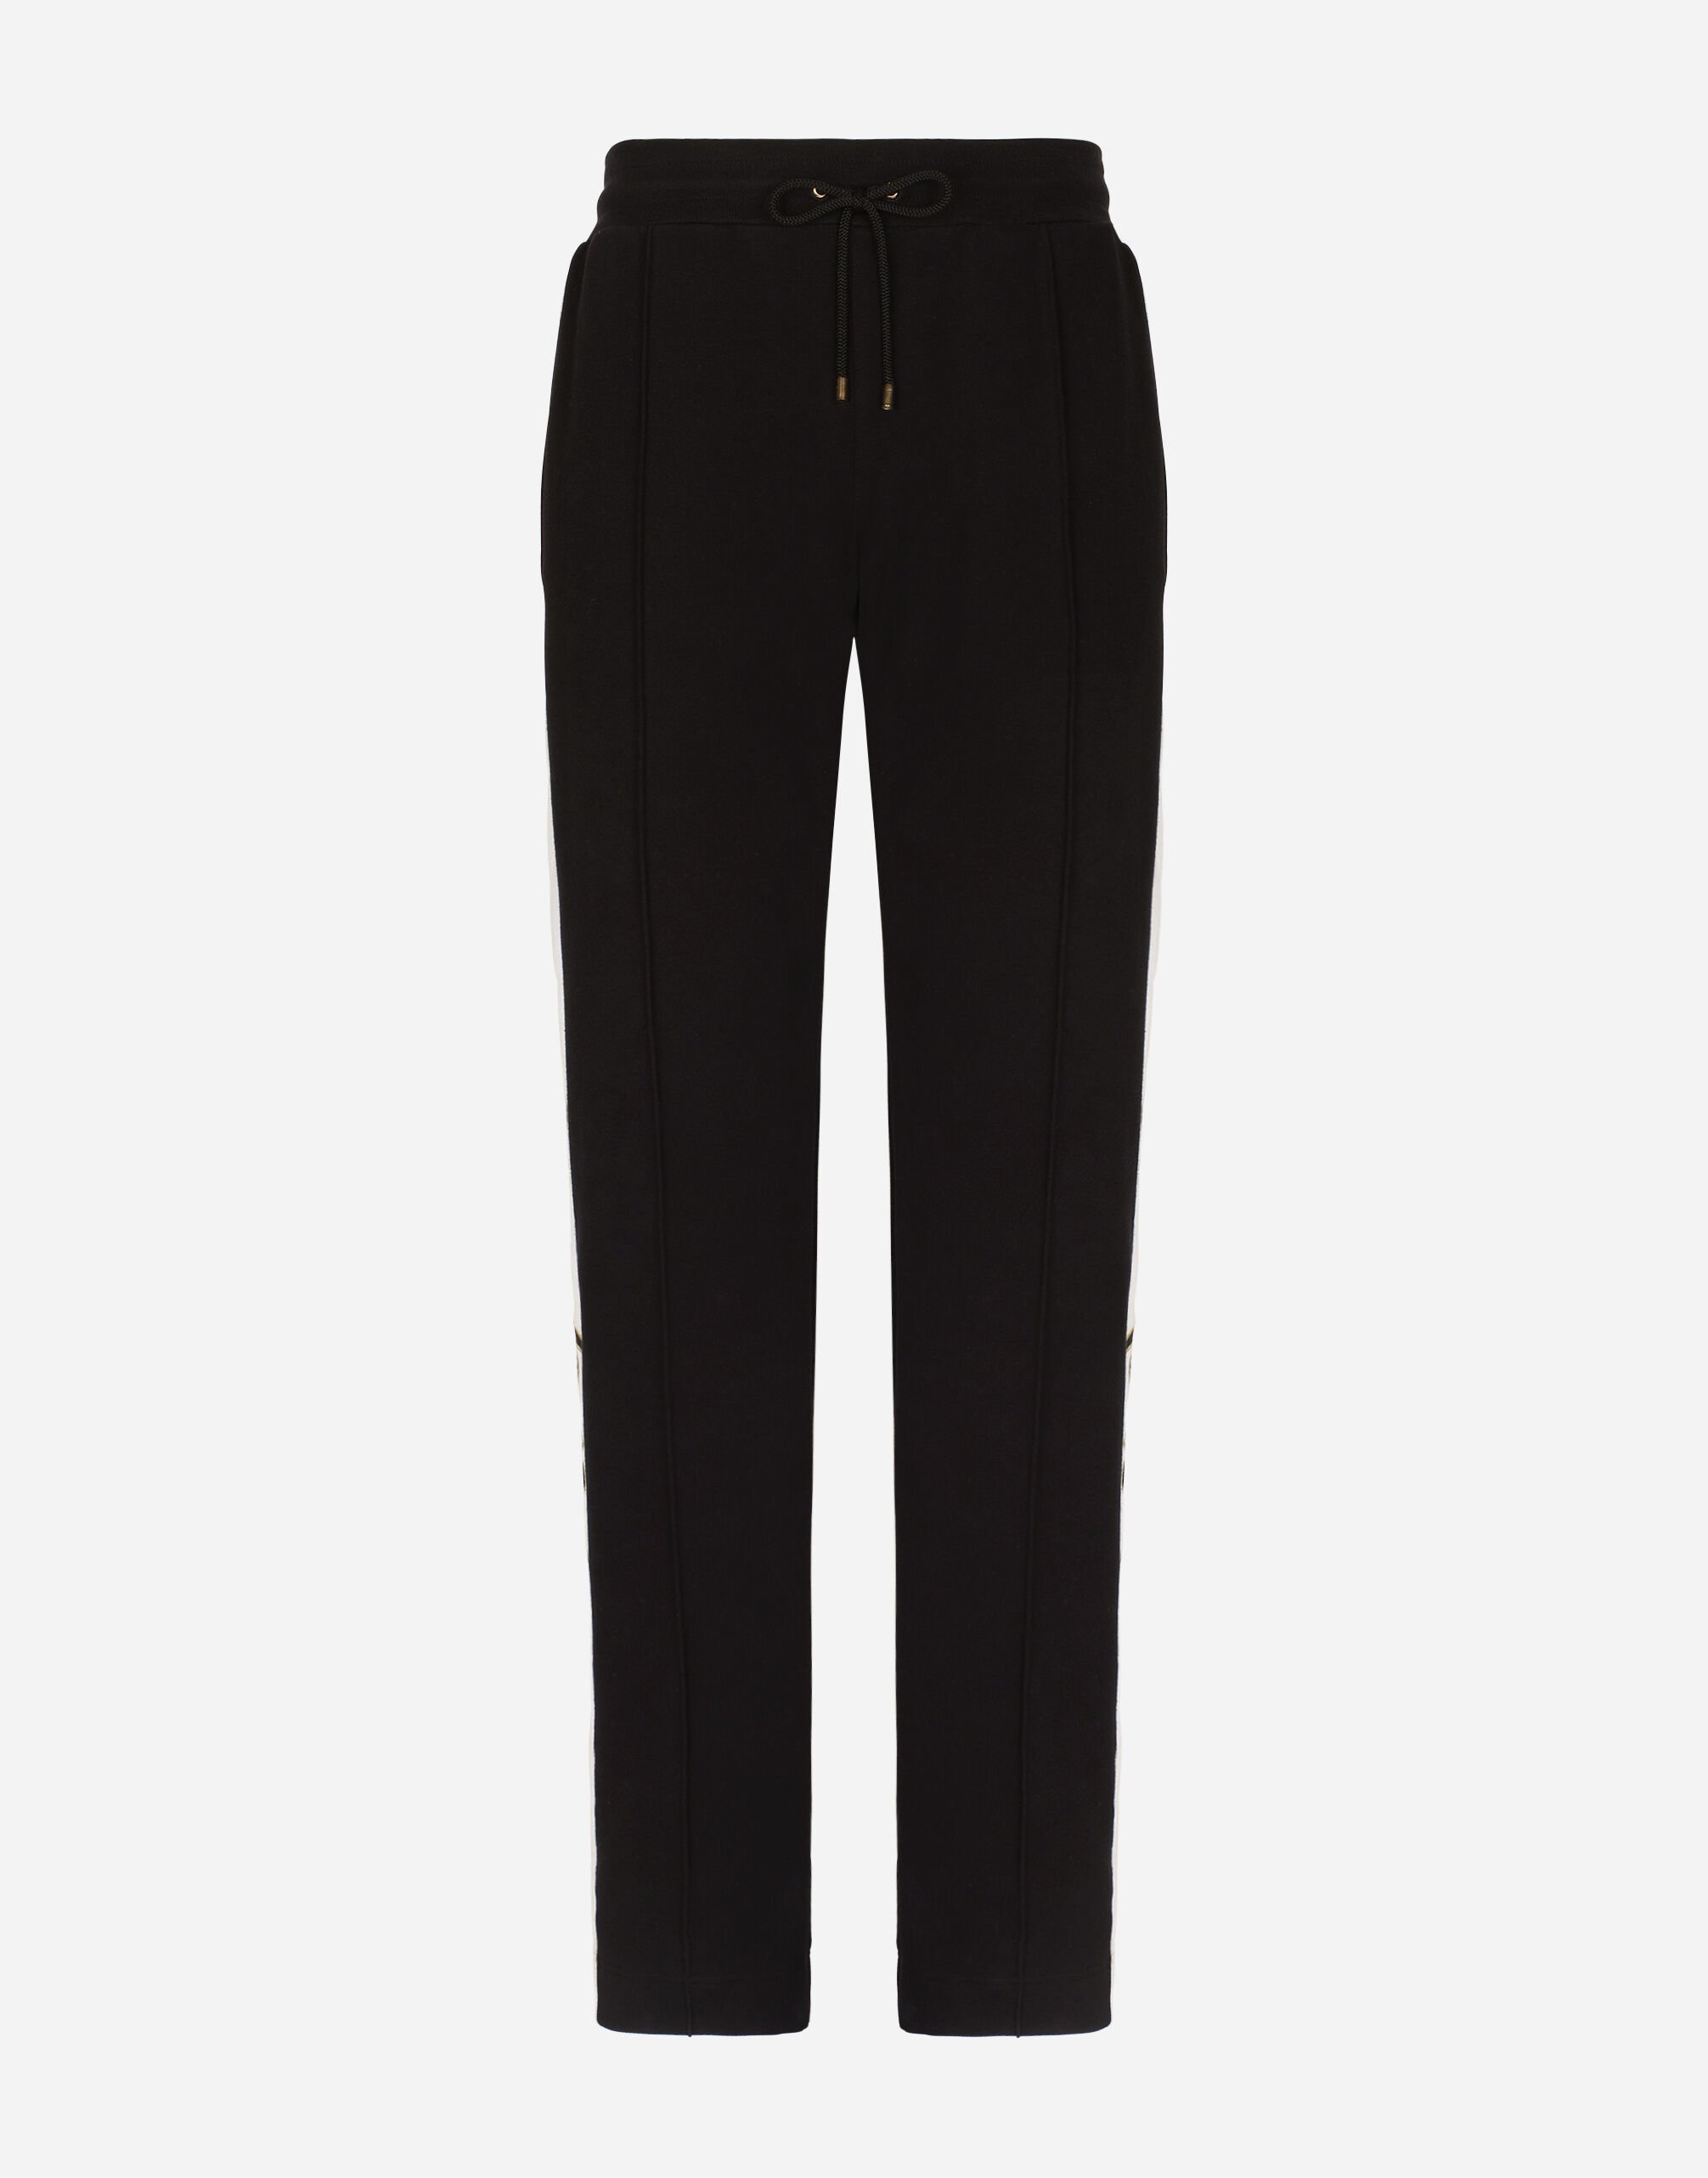 Dolce & Gabbana Jersey jogging pants with embroidered bands Black G9AHFTGG065